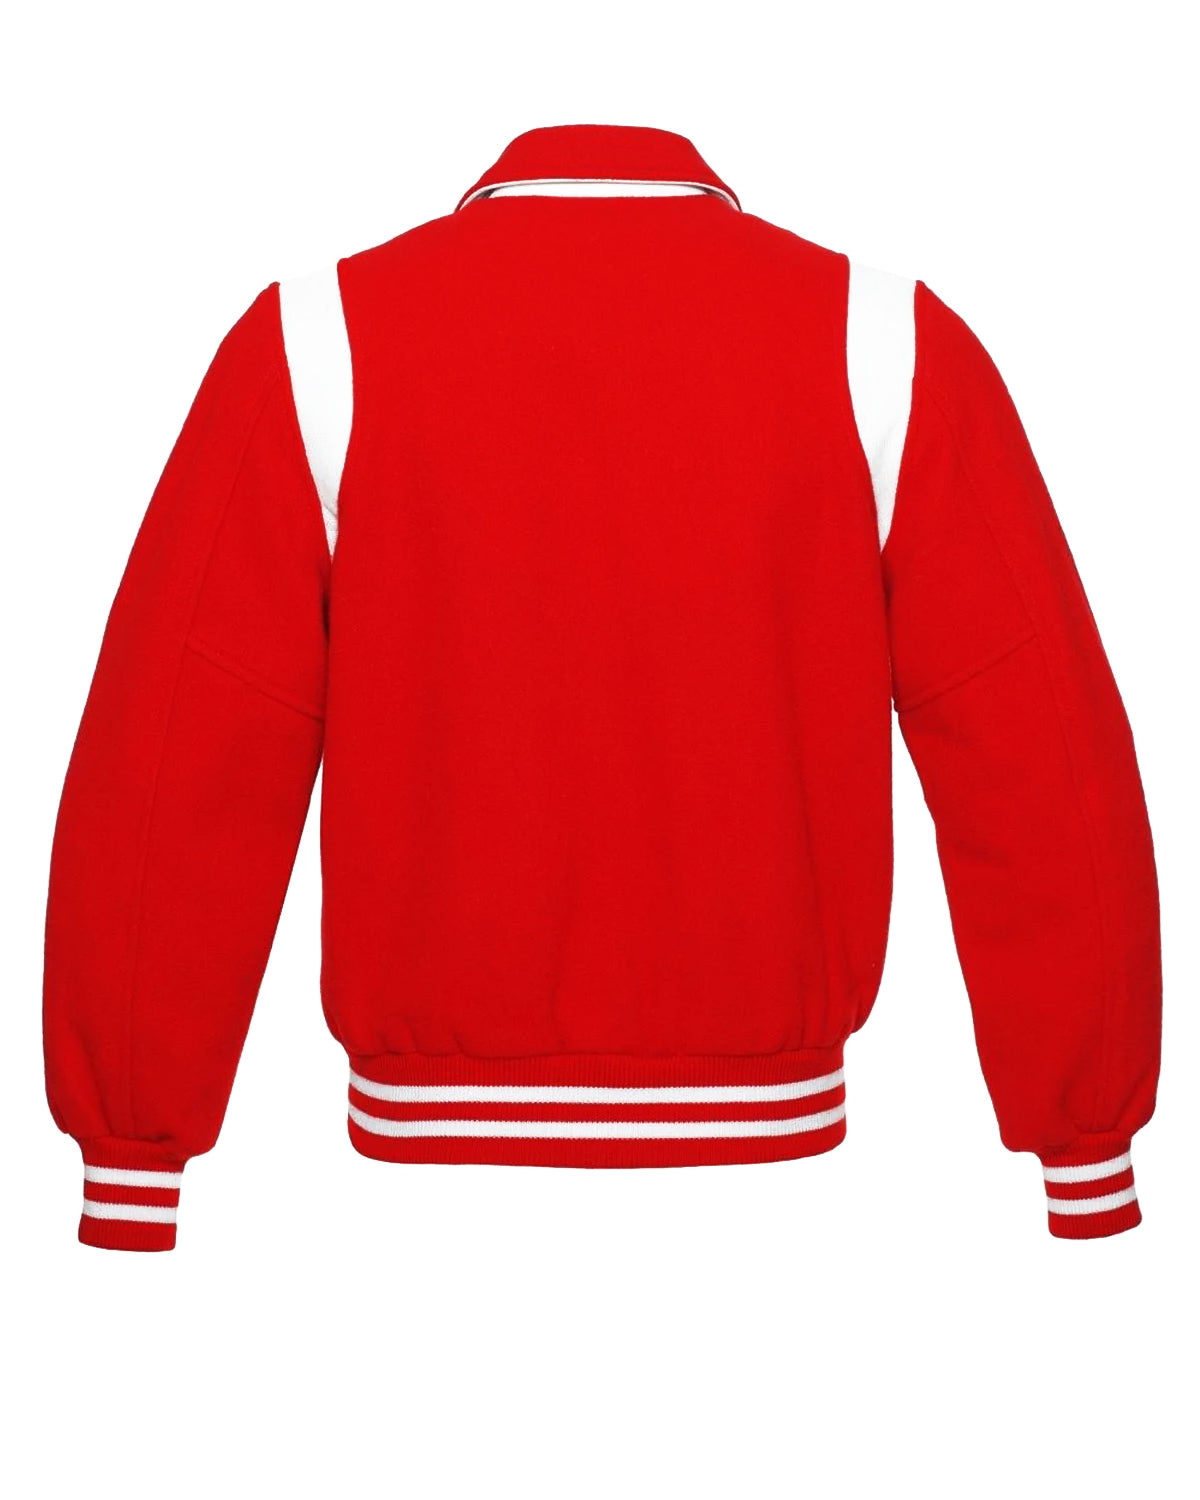 Sailor Collar Red And White Letterman Varsity Jacket 